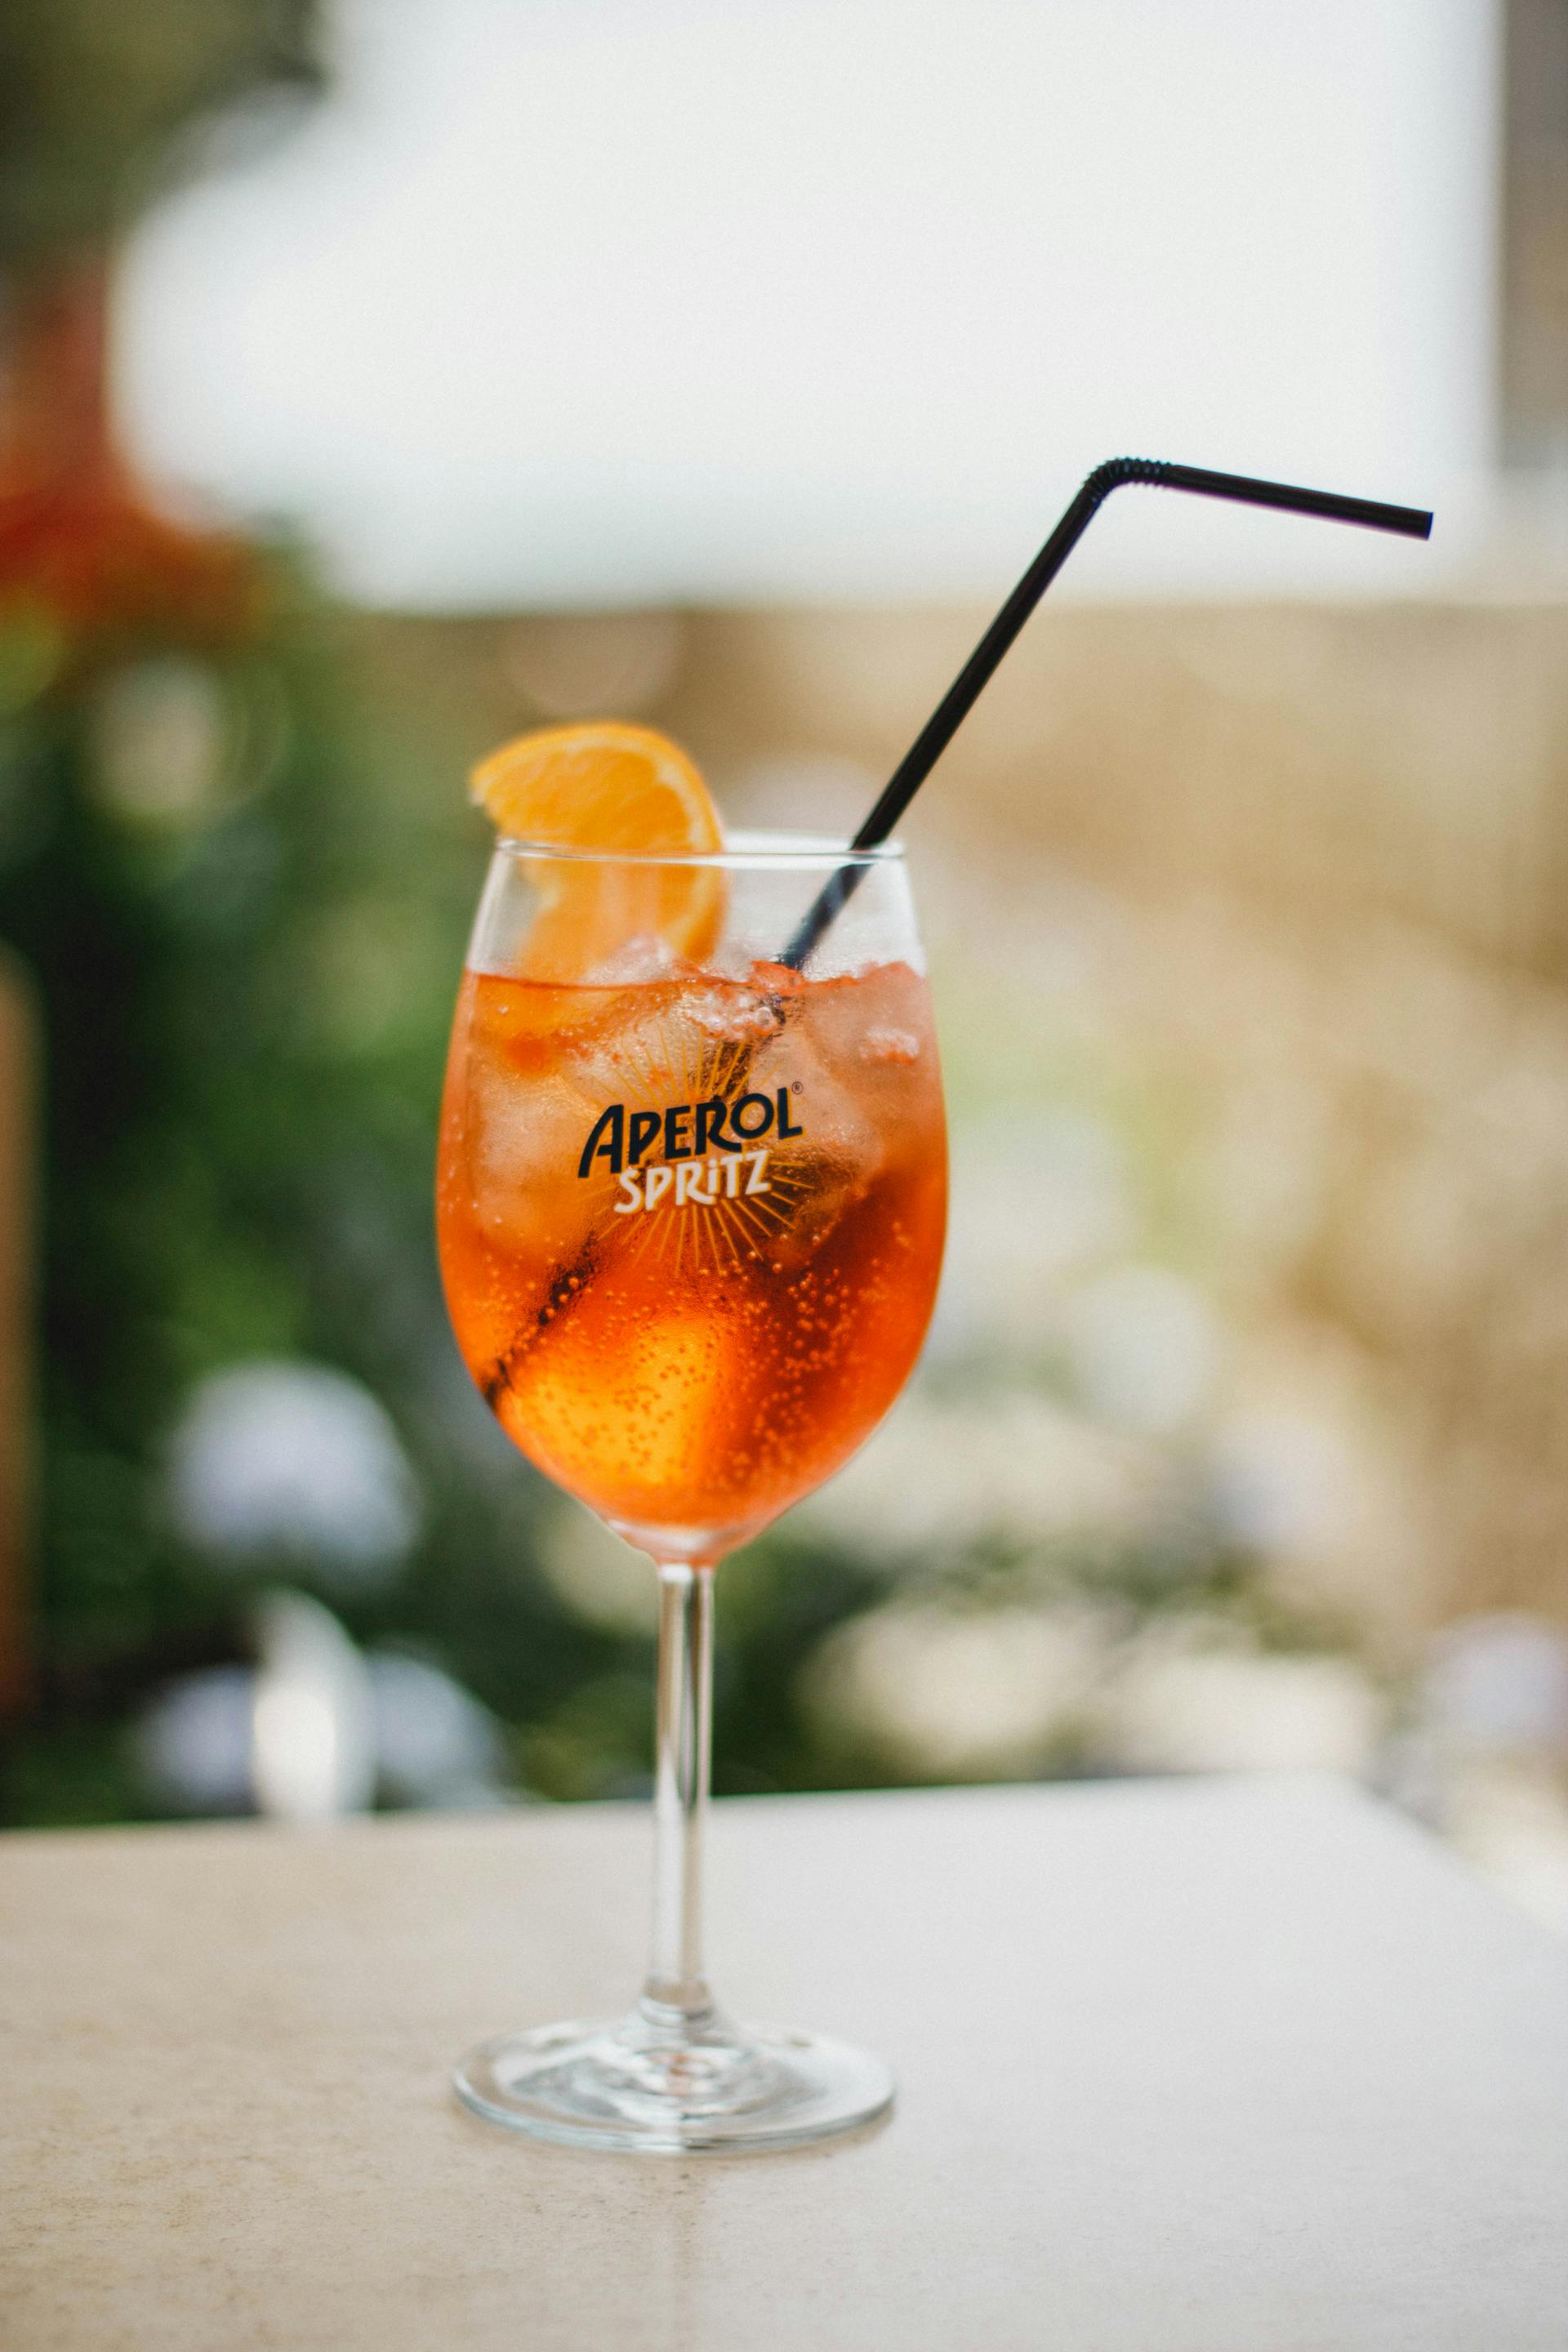 A cocktail with a black straw | Source: Pexels